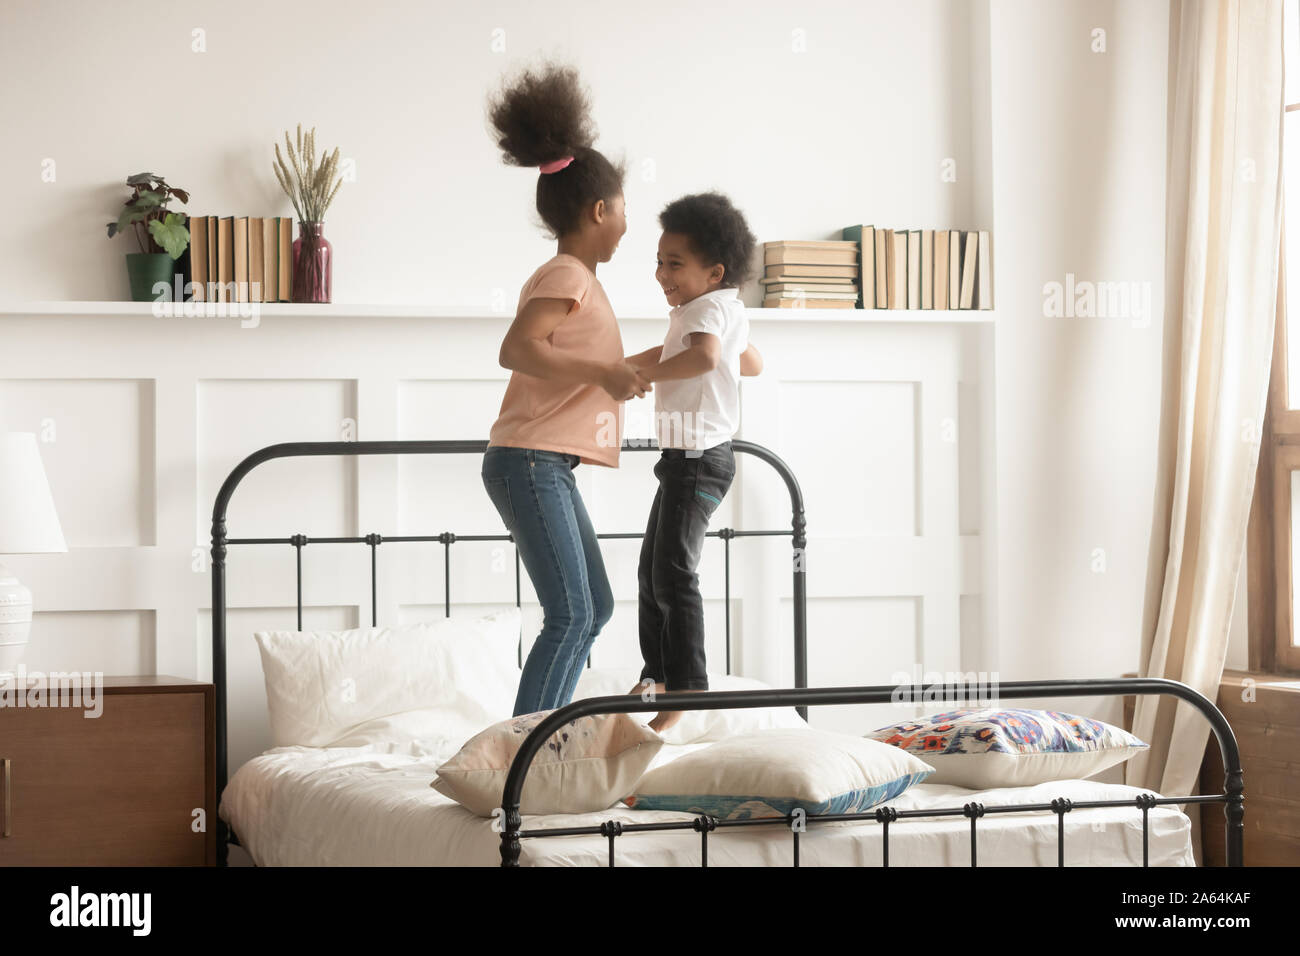 Active black brother and sister jump on bed together Stock Photo